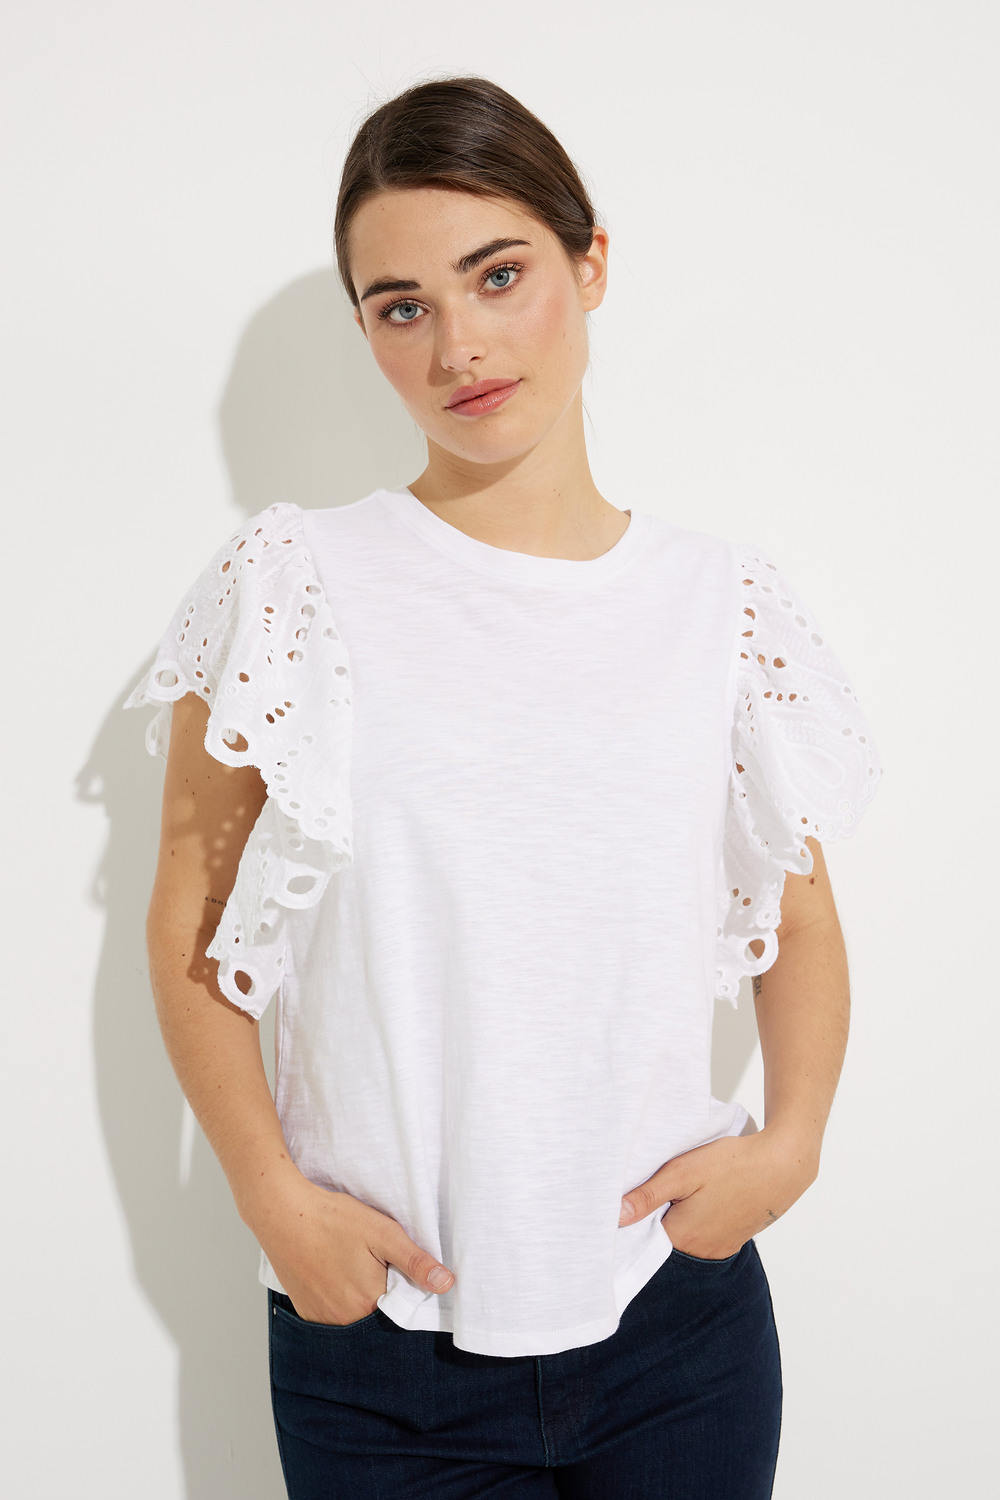 Lace Flutter Sleeve Top Style T7639. True White